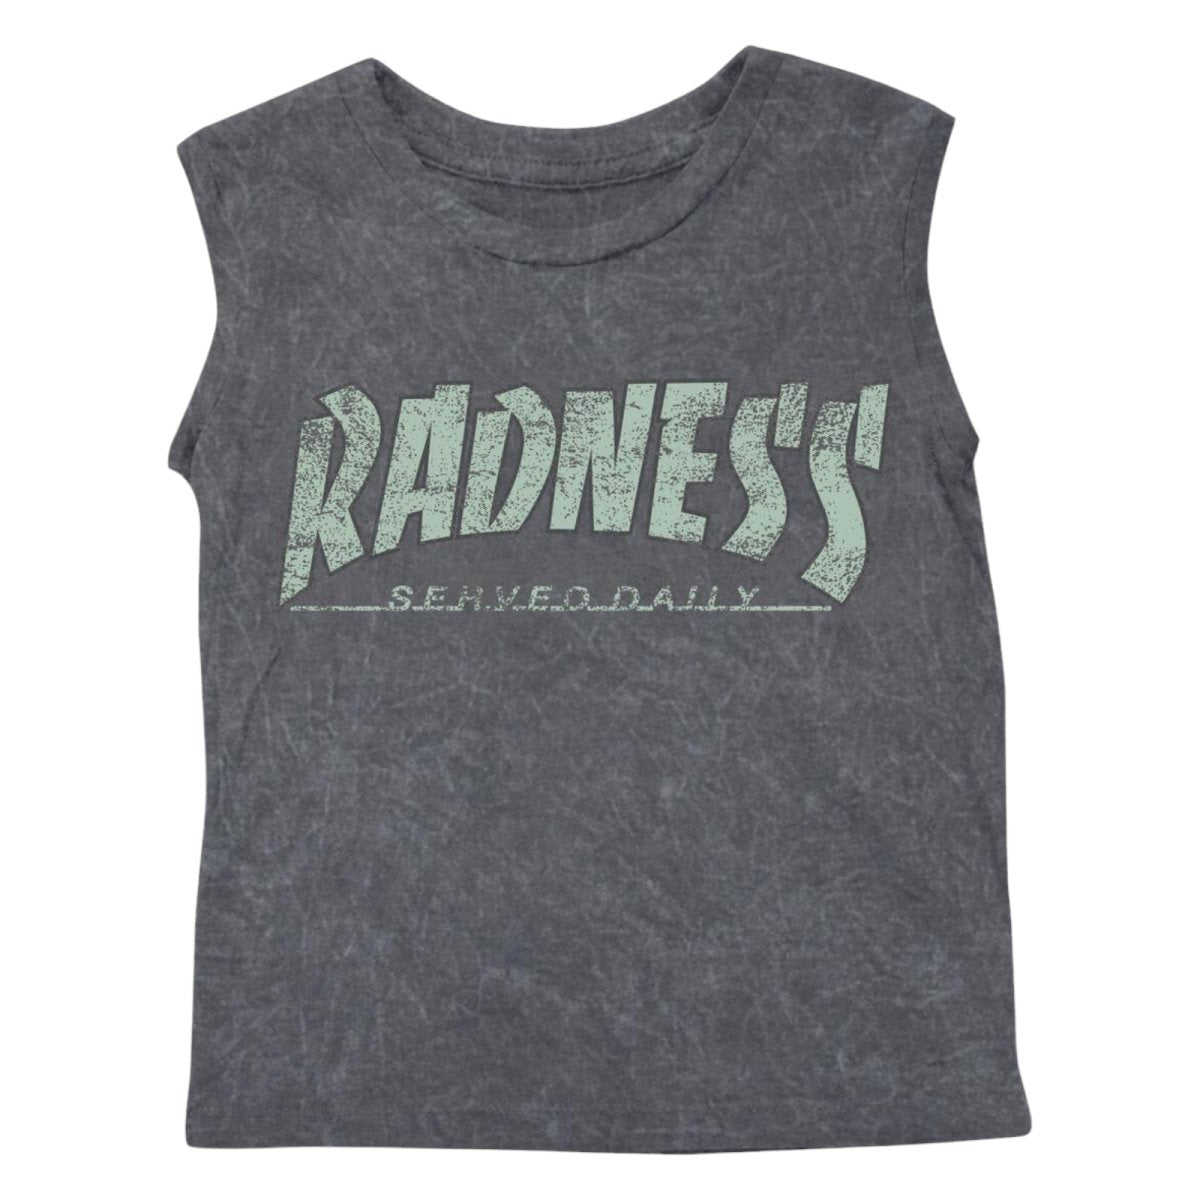 RADNESS SERVED DAILY TANK TOP - TANK TOPS